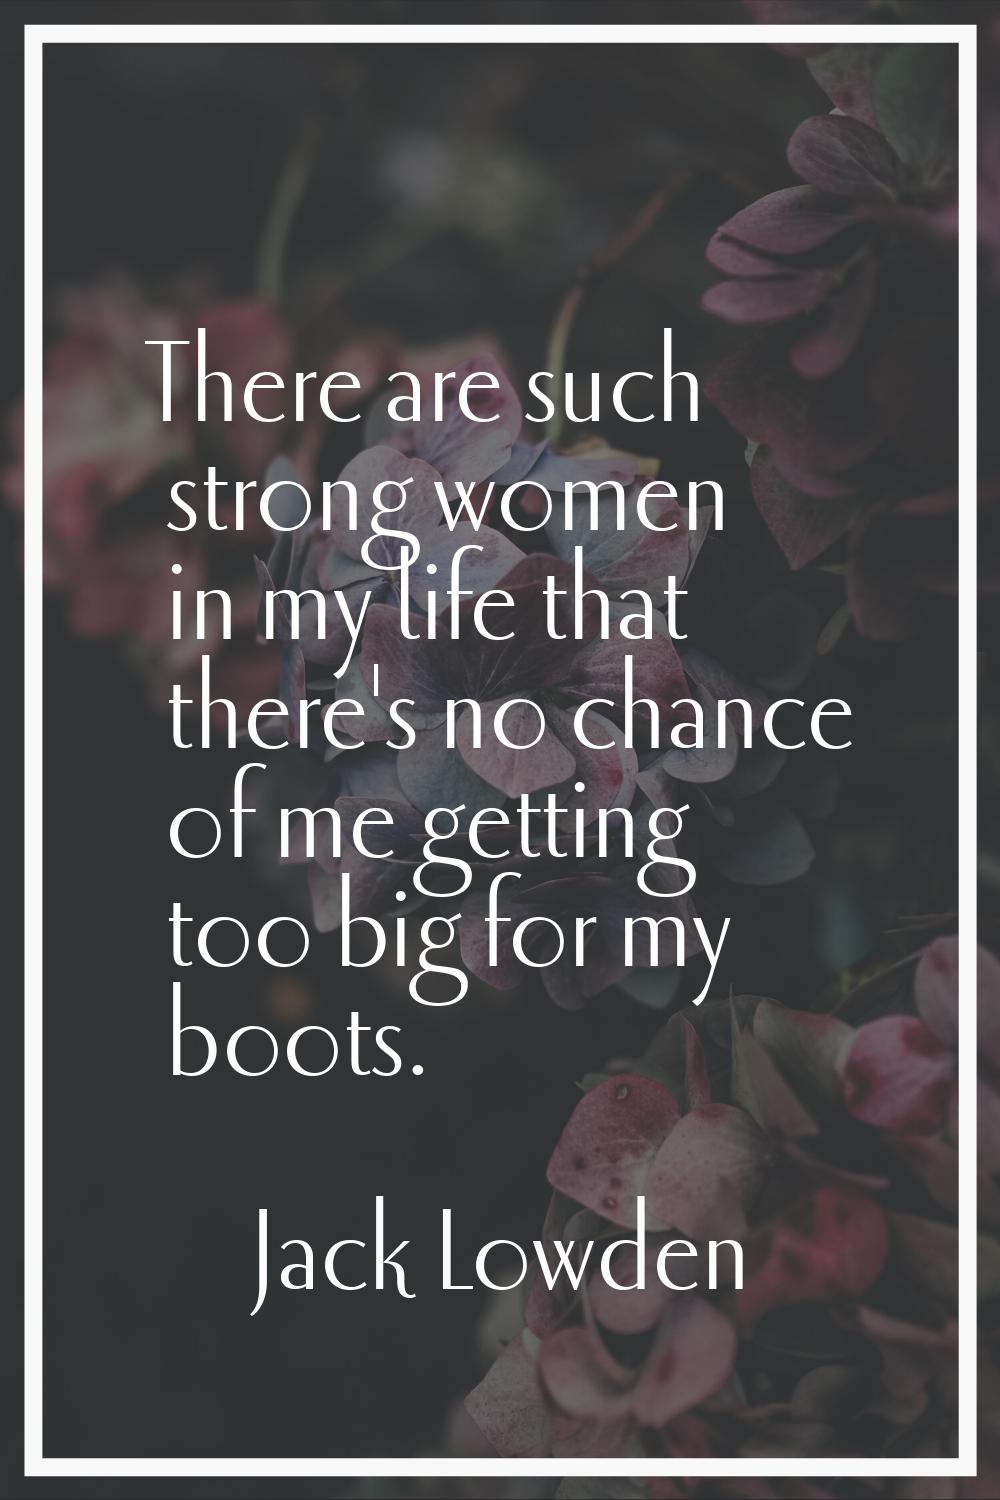 There are such strong women in my life that there's no chance of me getting too big for my boots.